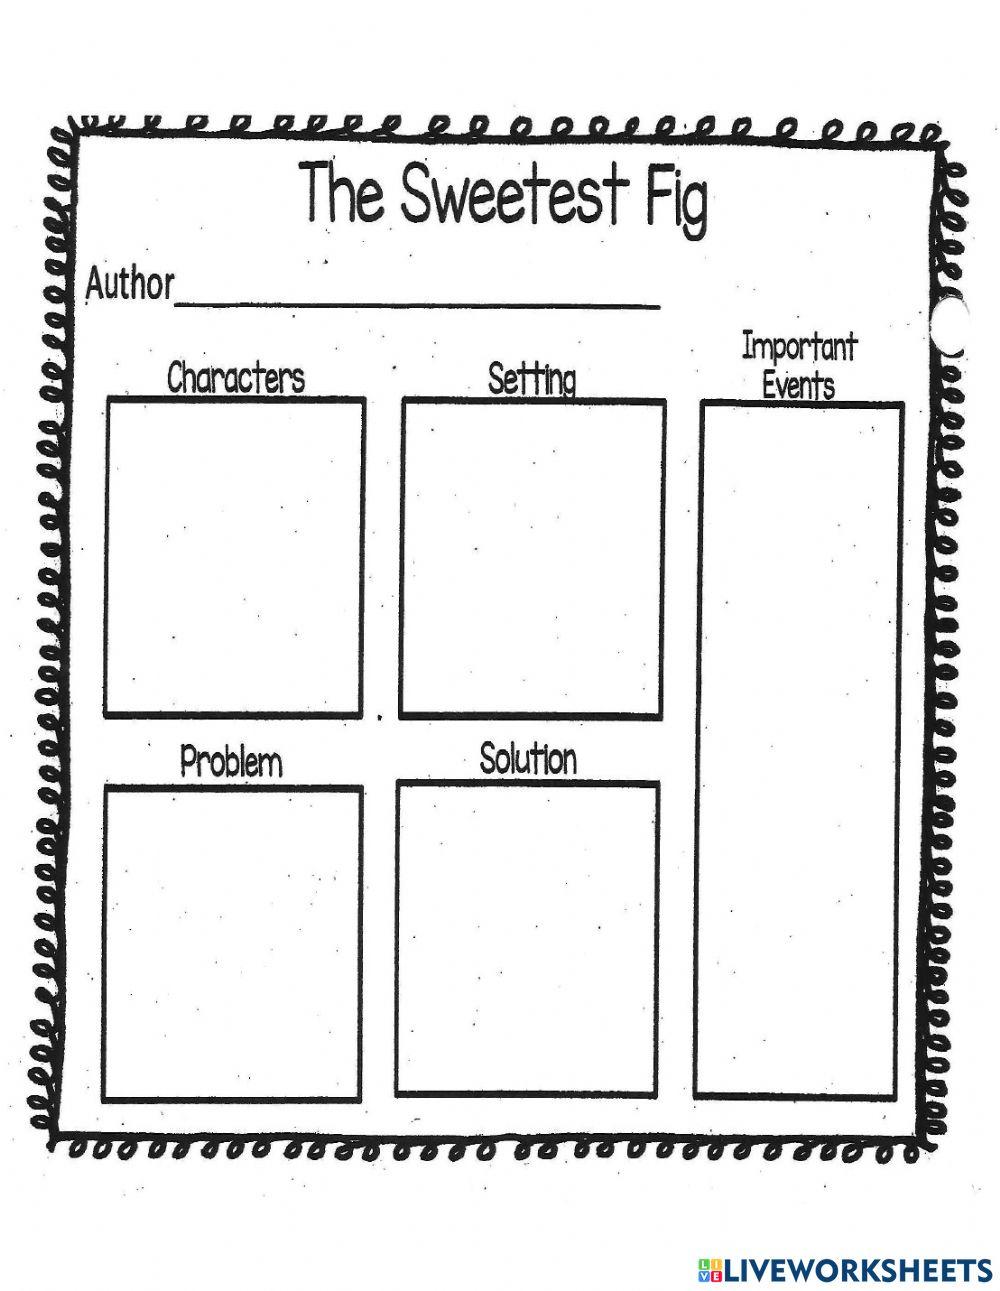 The Sweetest Fig - Parts of the Story